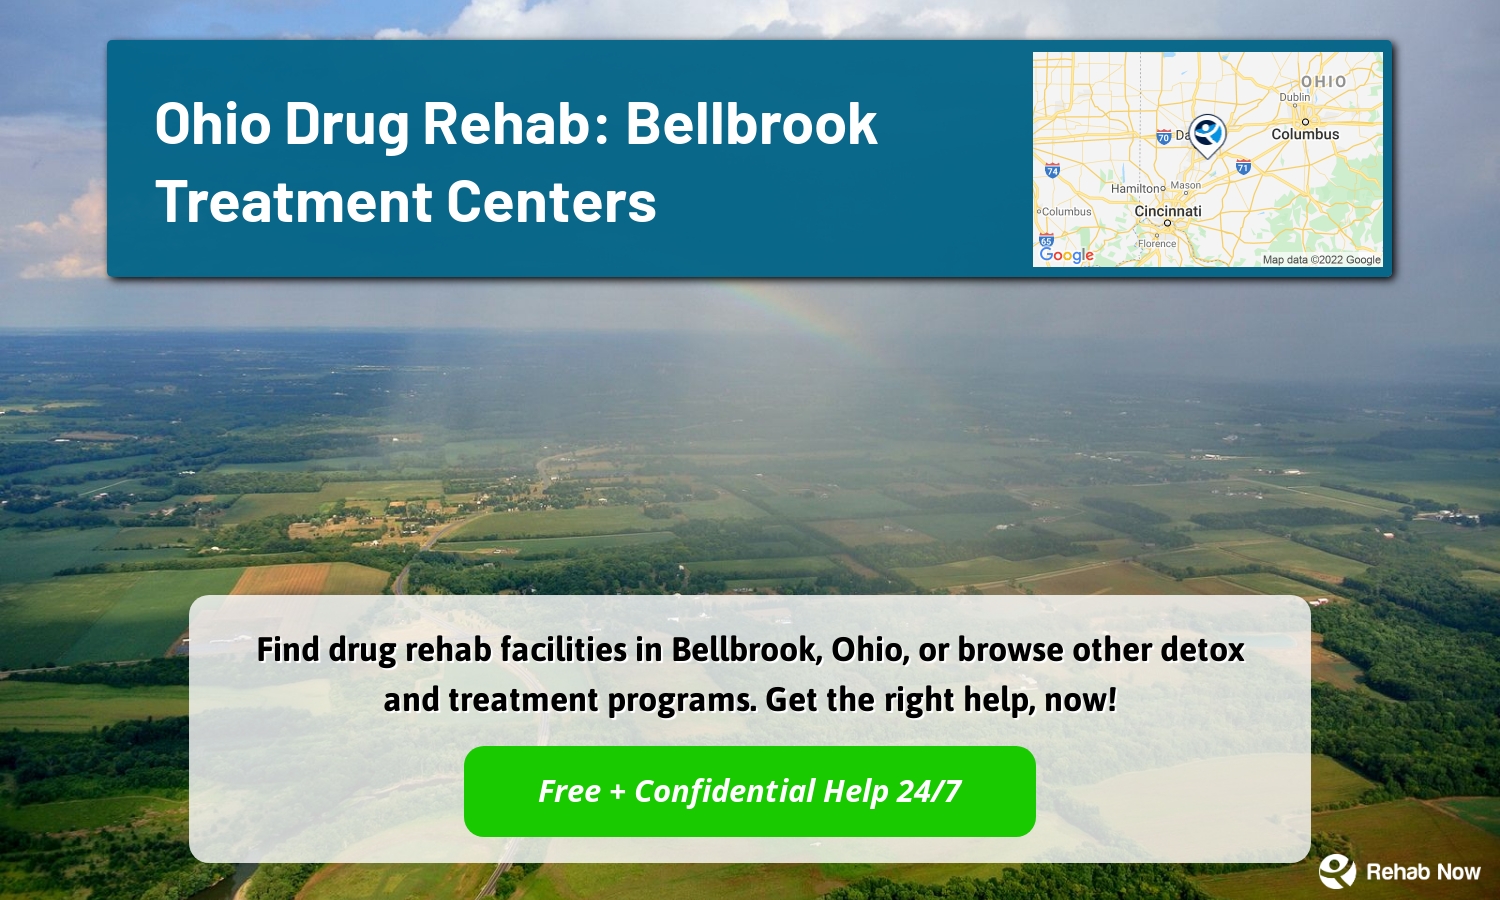 Find drug rehab facilities in Bellbrook, Ohio, or browse other detox and treatment programs. Get the right help, now!